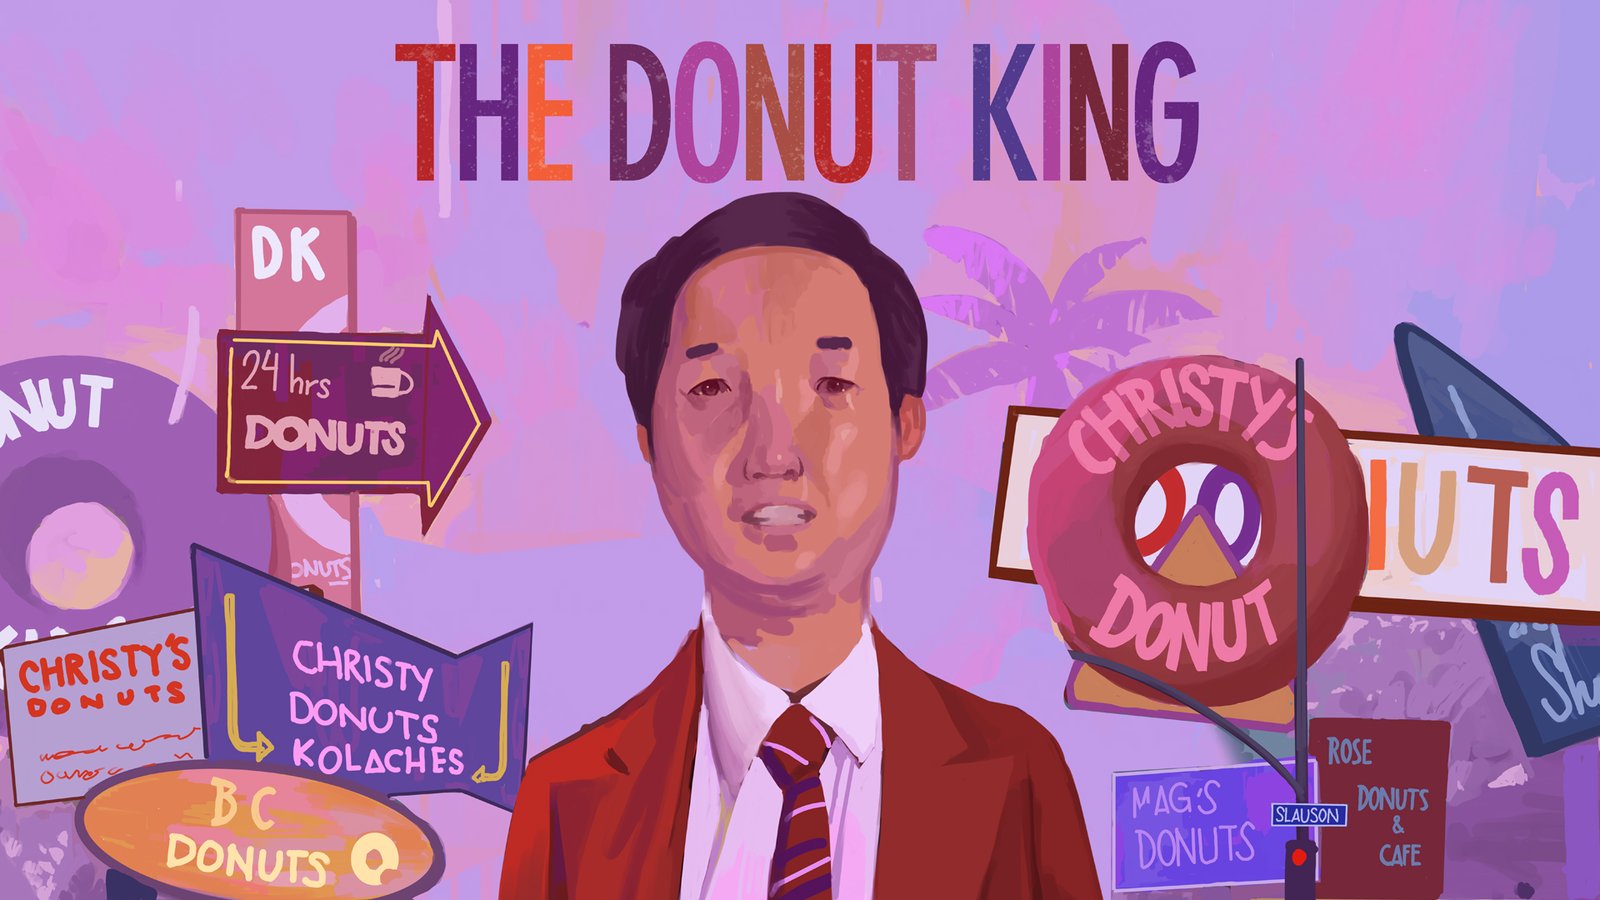 The Donut King